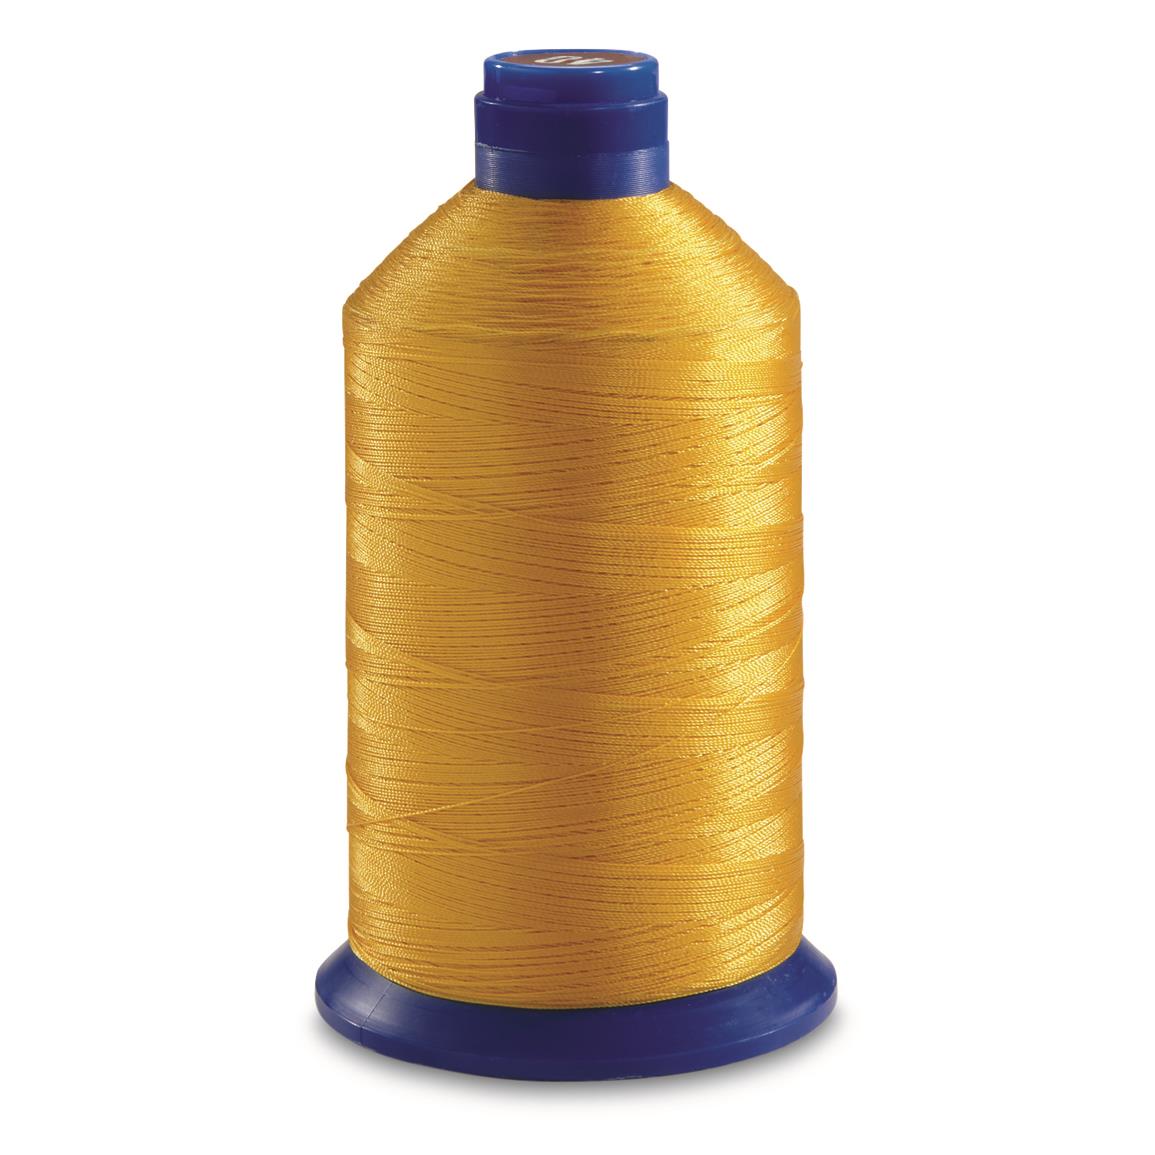 French Military Surplus Yellow Parachute Thread Spools, 3 Pack, New